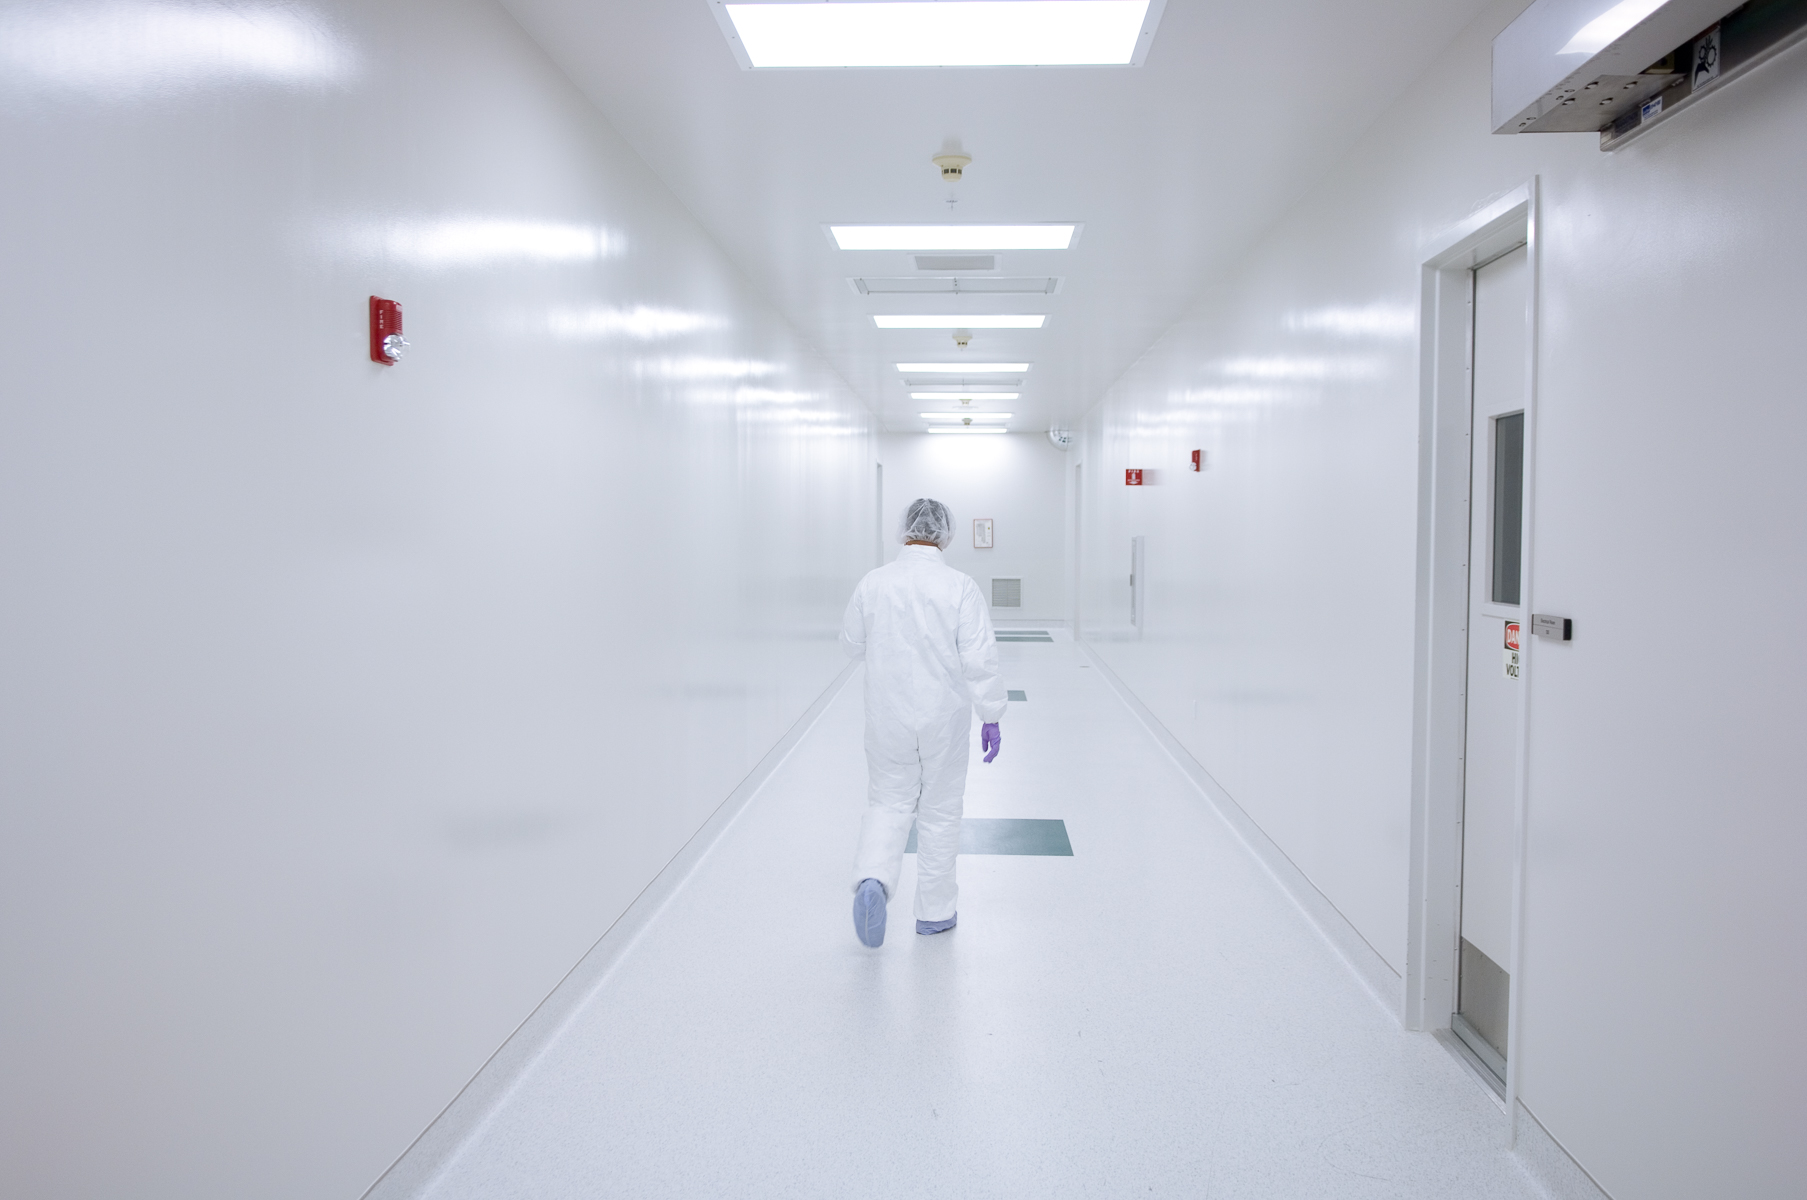 Fully gowned scientist walking hall in clean room